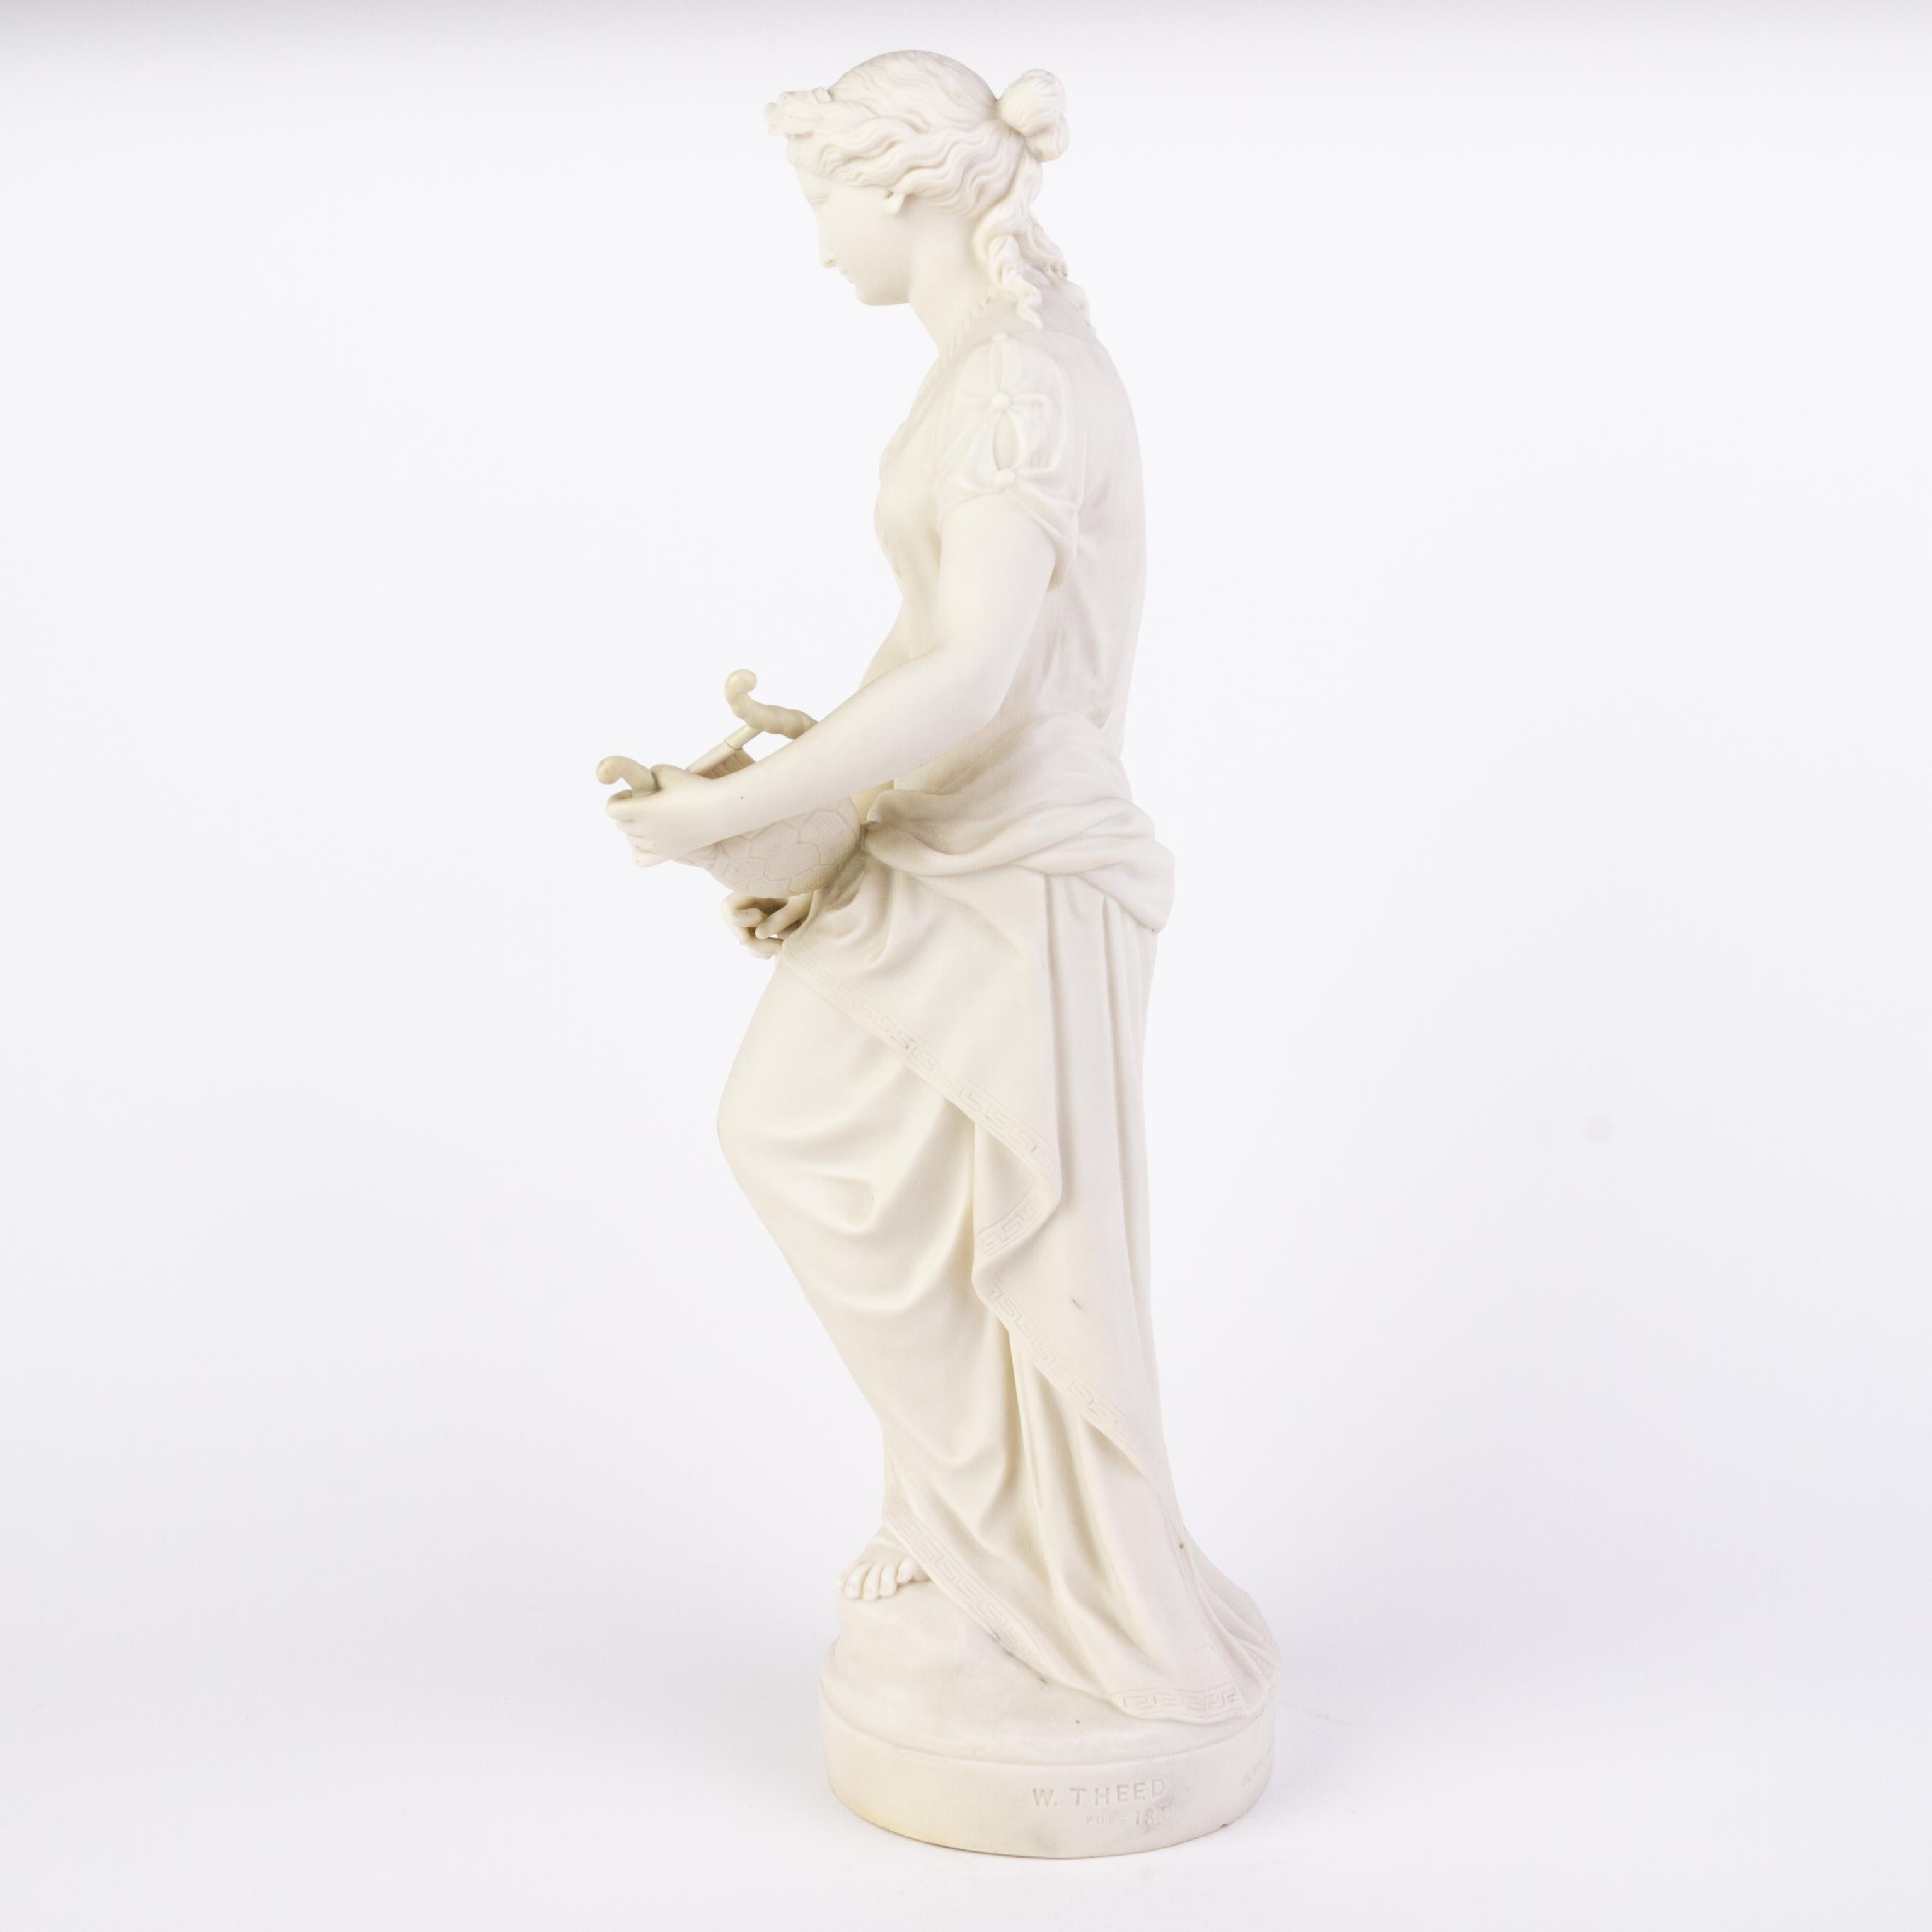 English Victorian Copeland Parian Ware Statue of Sappho the Poet 19th Century 4